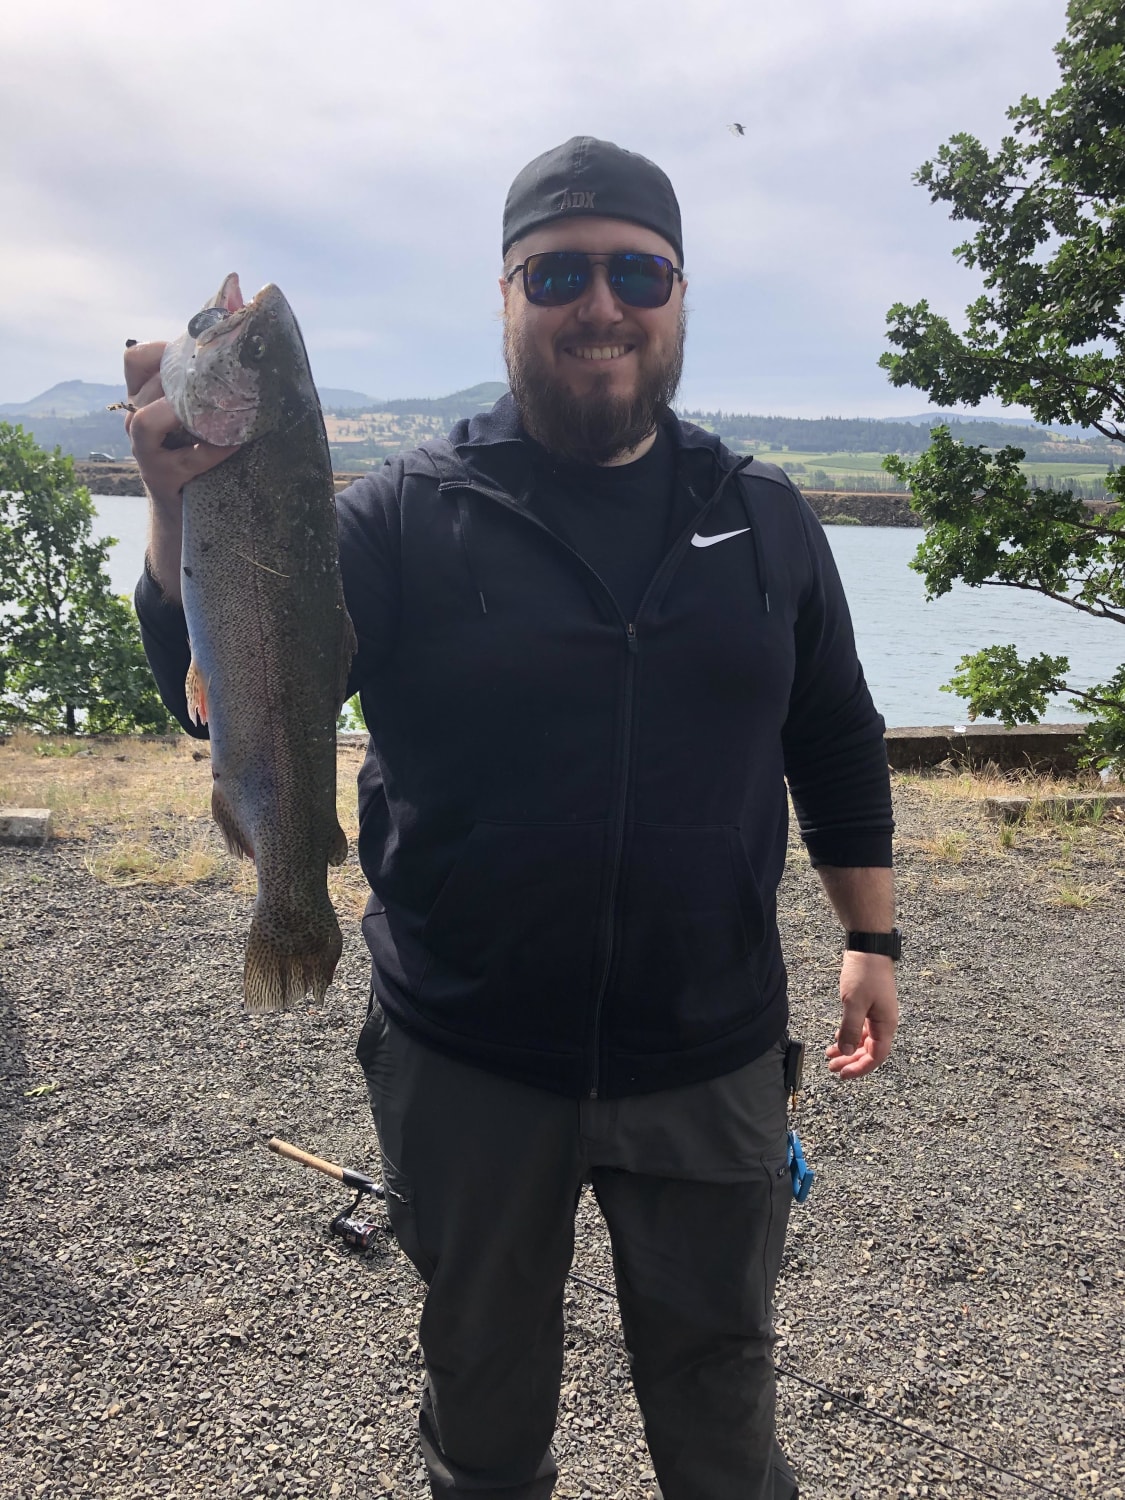 New PB Rainbow Trout. 4lbs even, 21.5in caught on ultralight gear.